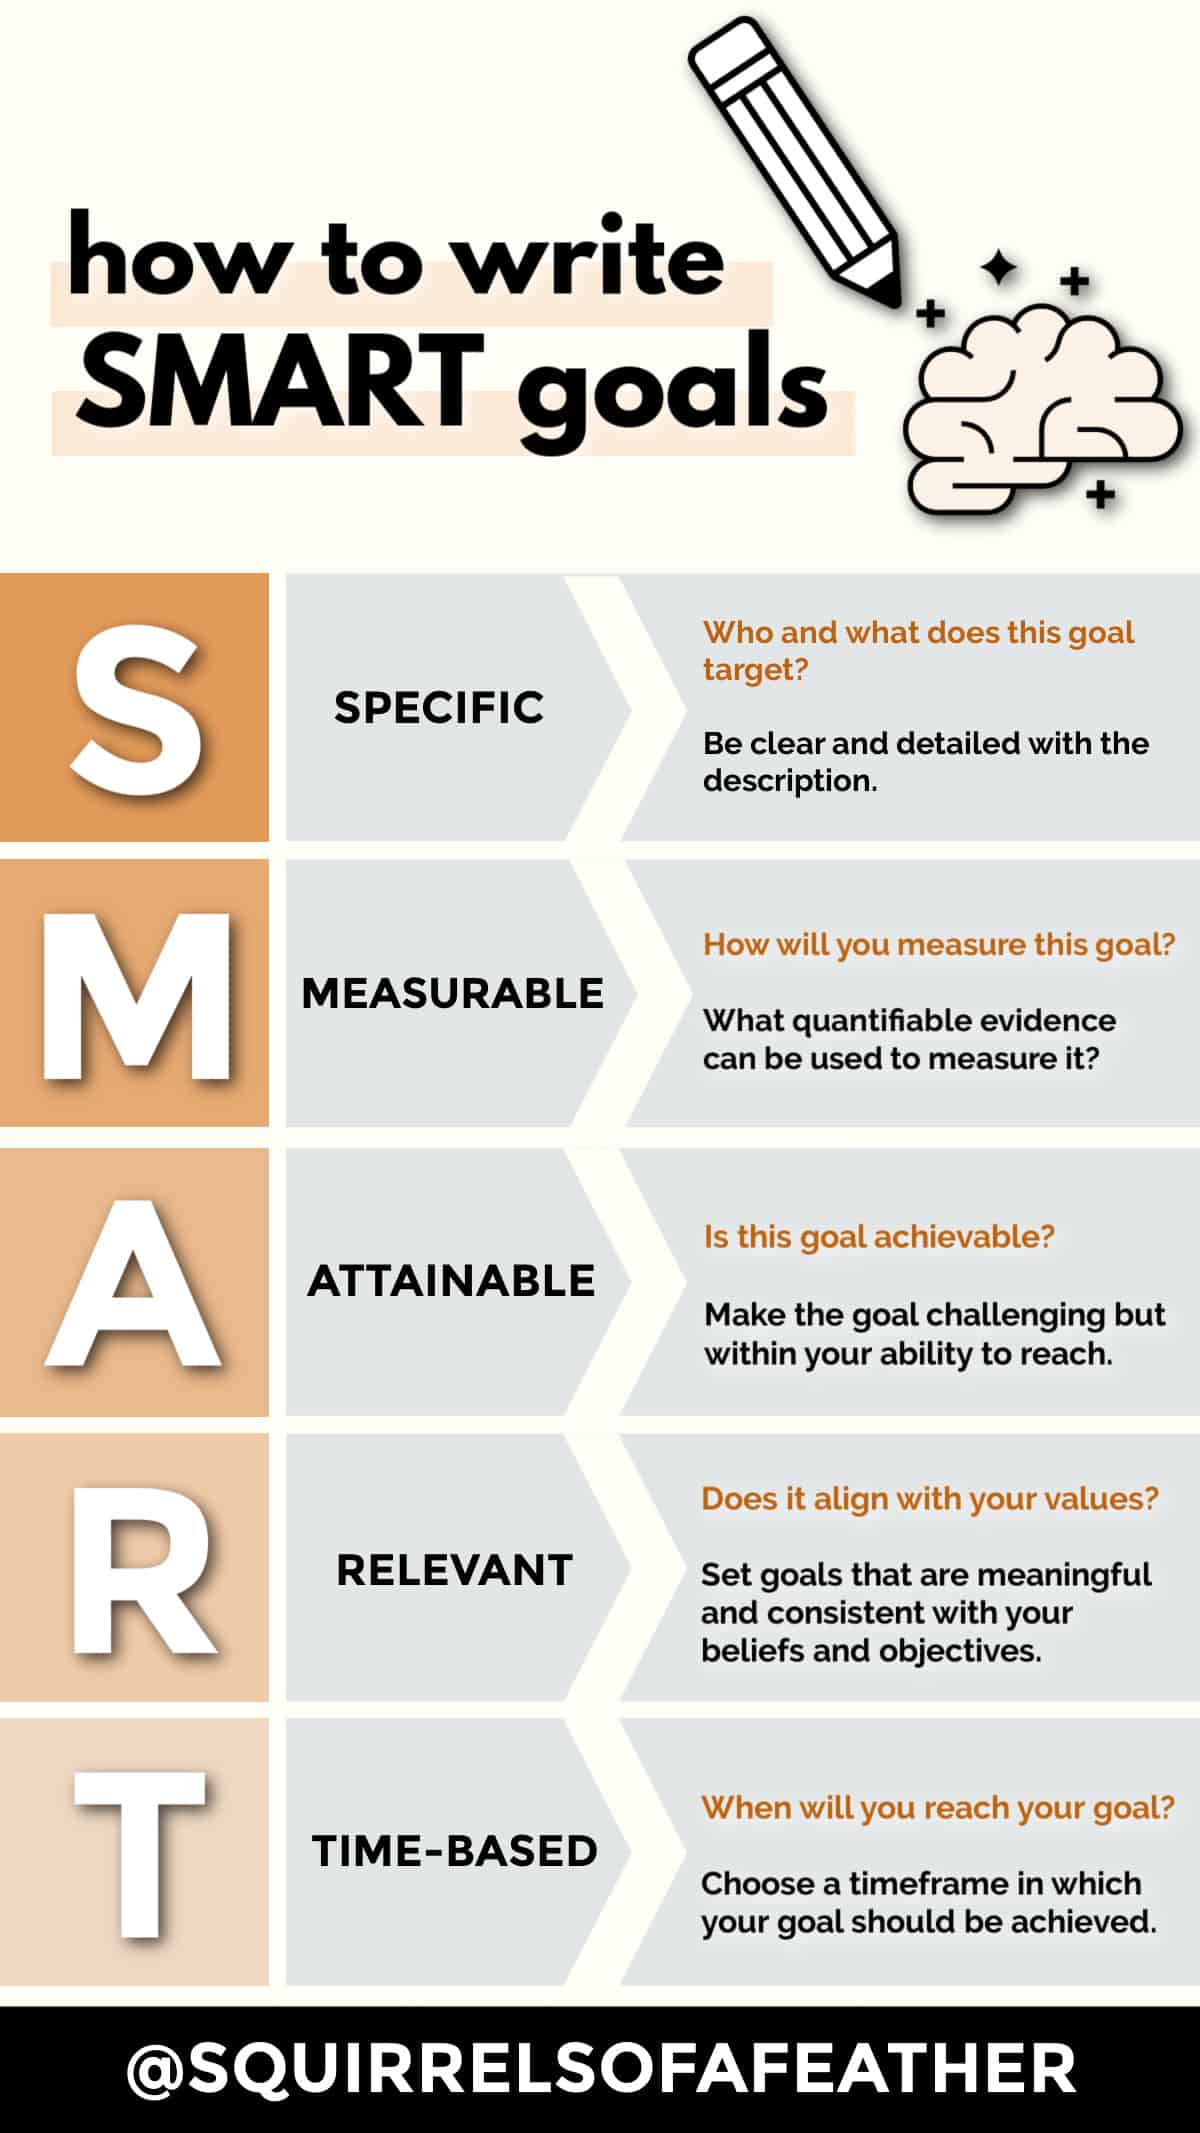 An infographic on how to write SMART goals